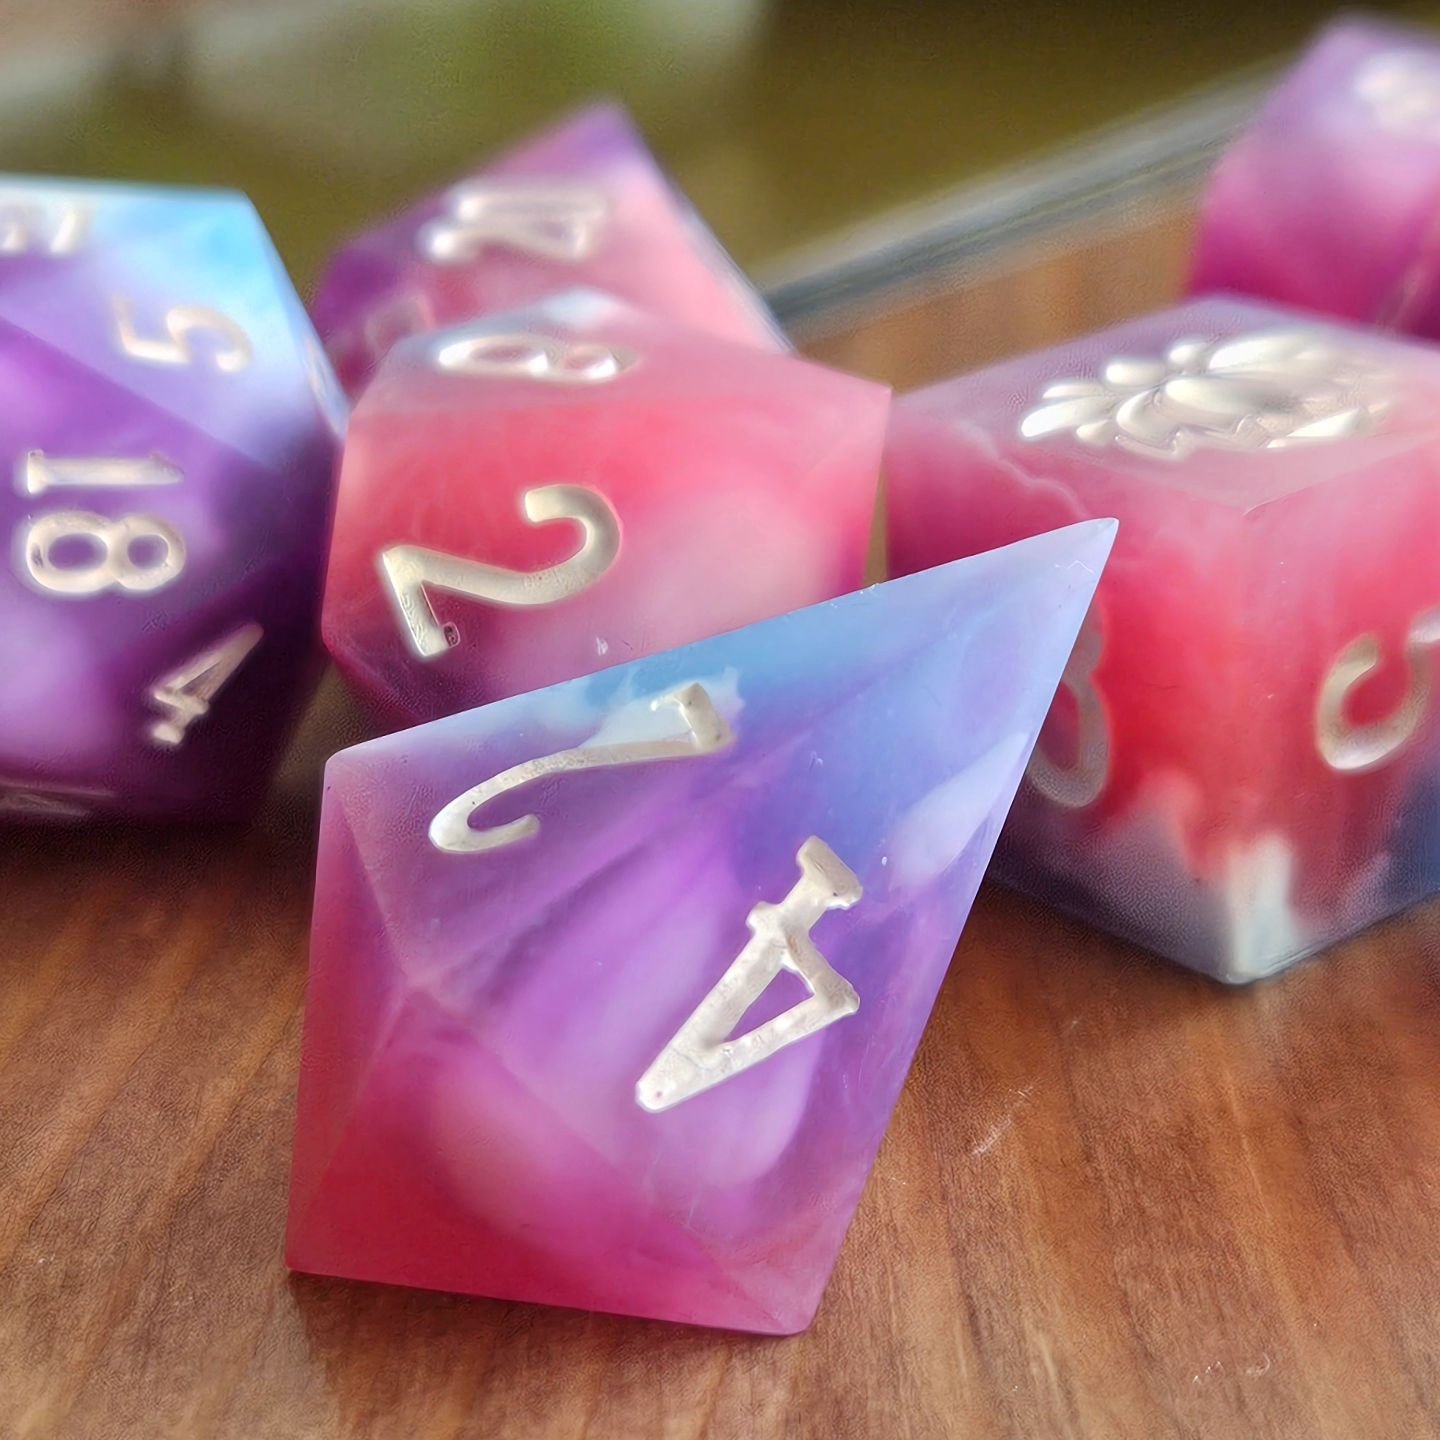 Neon Haze ○ These matte finish beauties will be in the next shop drop on Sunday the 28th of April at 6pm BST. Tap the reminder so you don't miss out!
&deg;
#dice  #diceset #dicemaking #dicegoblin #dnddice #dnd5e #dnd